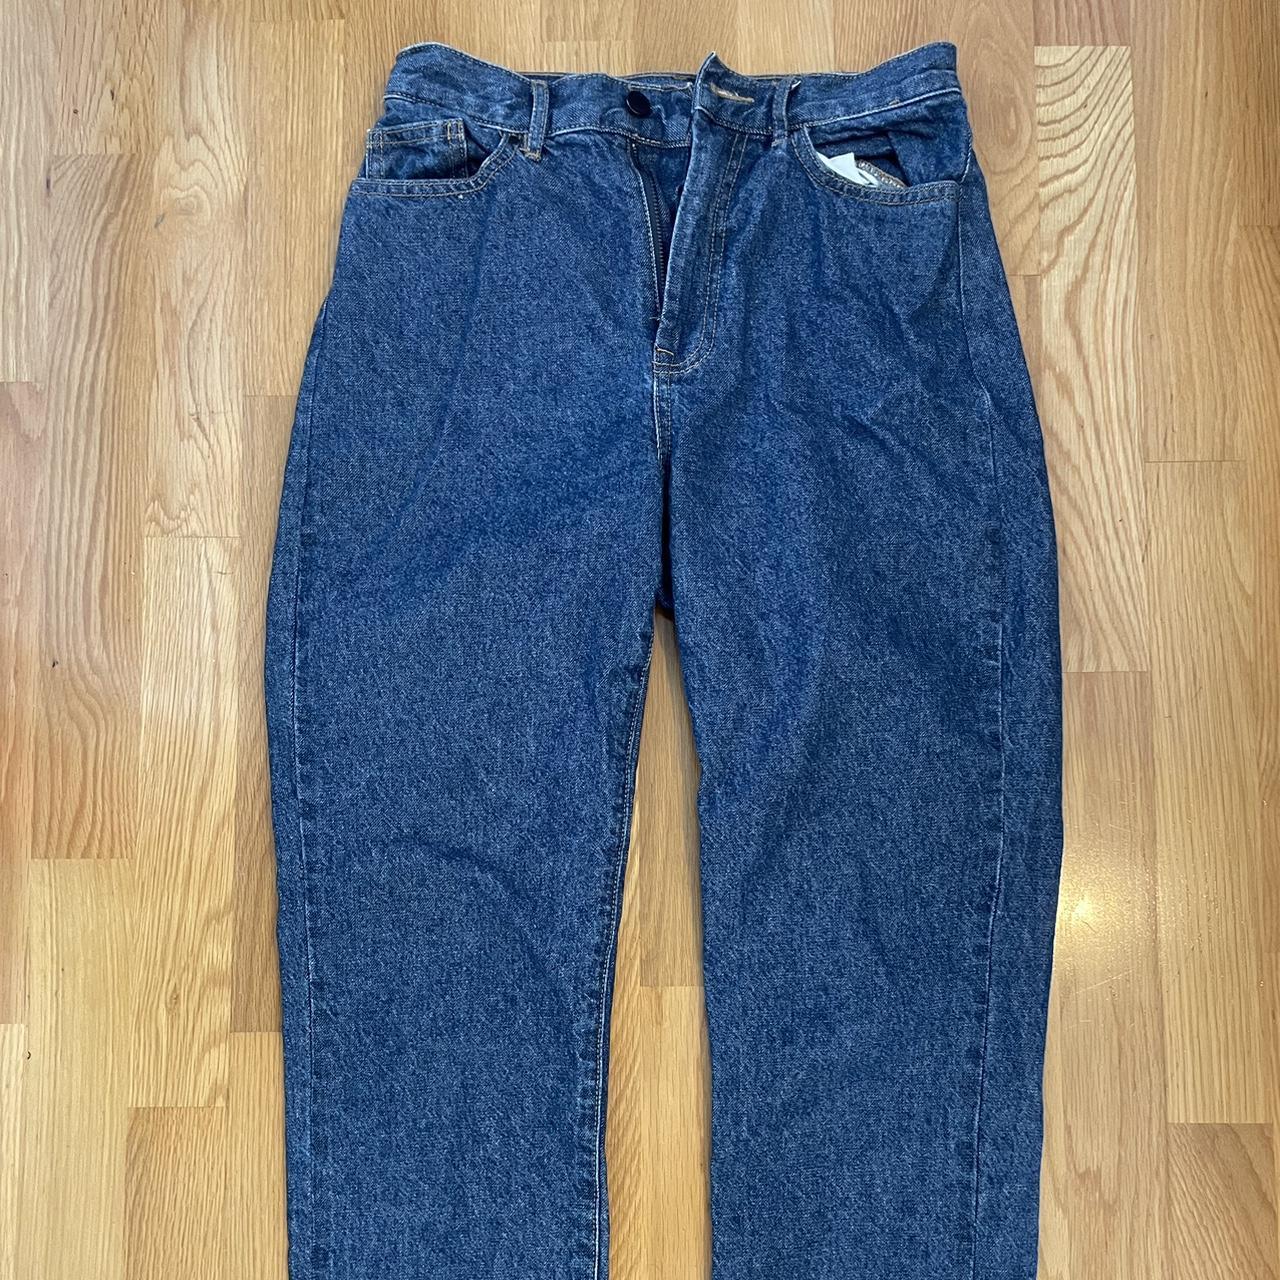 Saba straight leg high waisted jeans Purchased from... - Depop